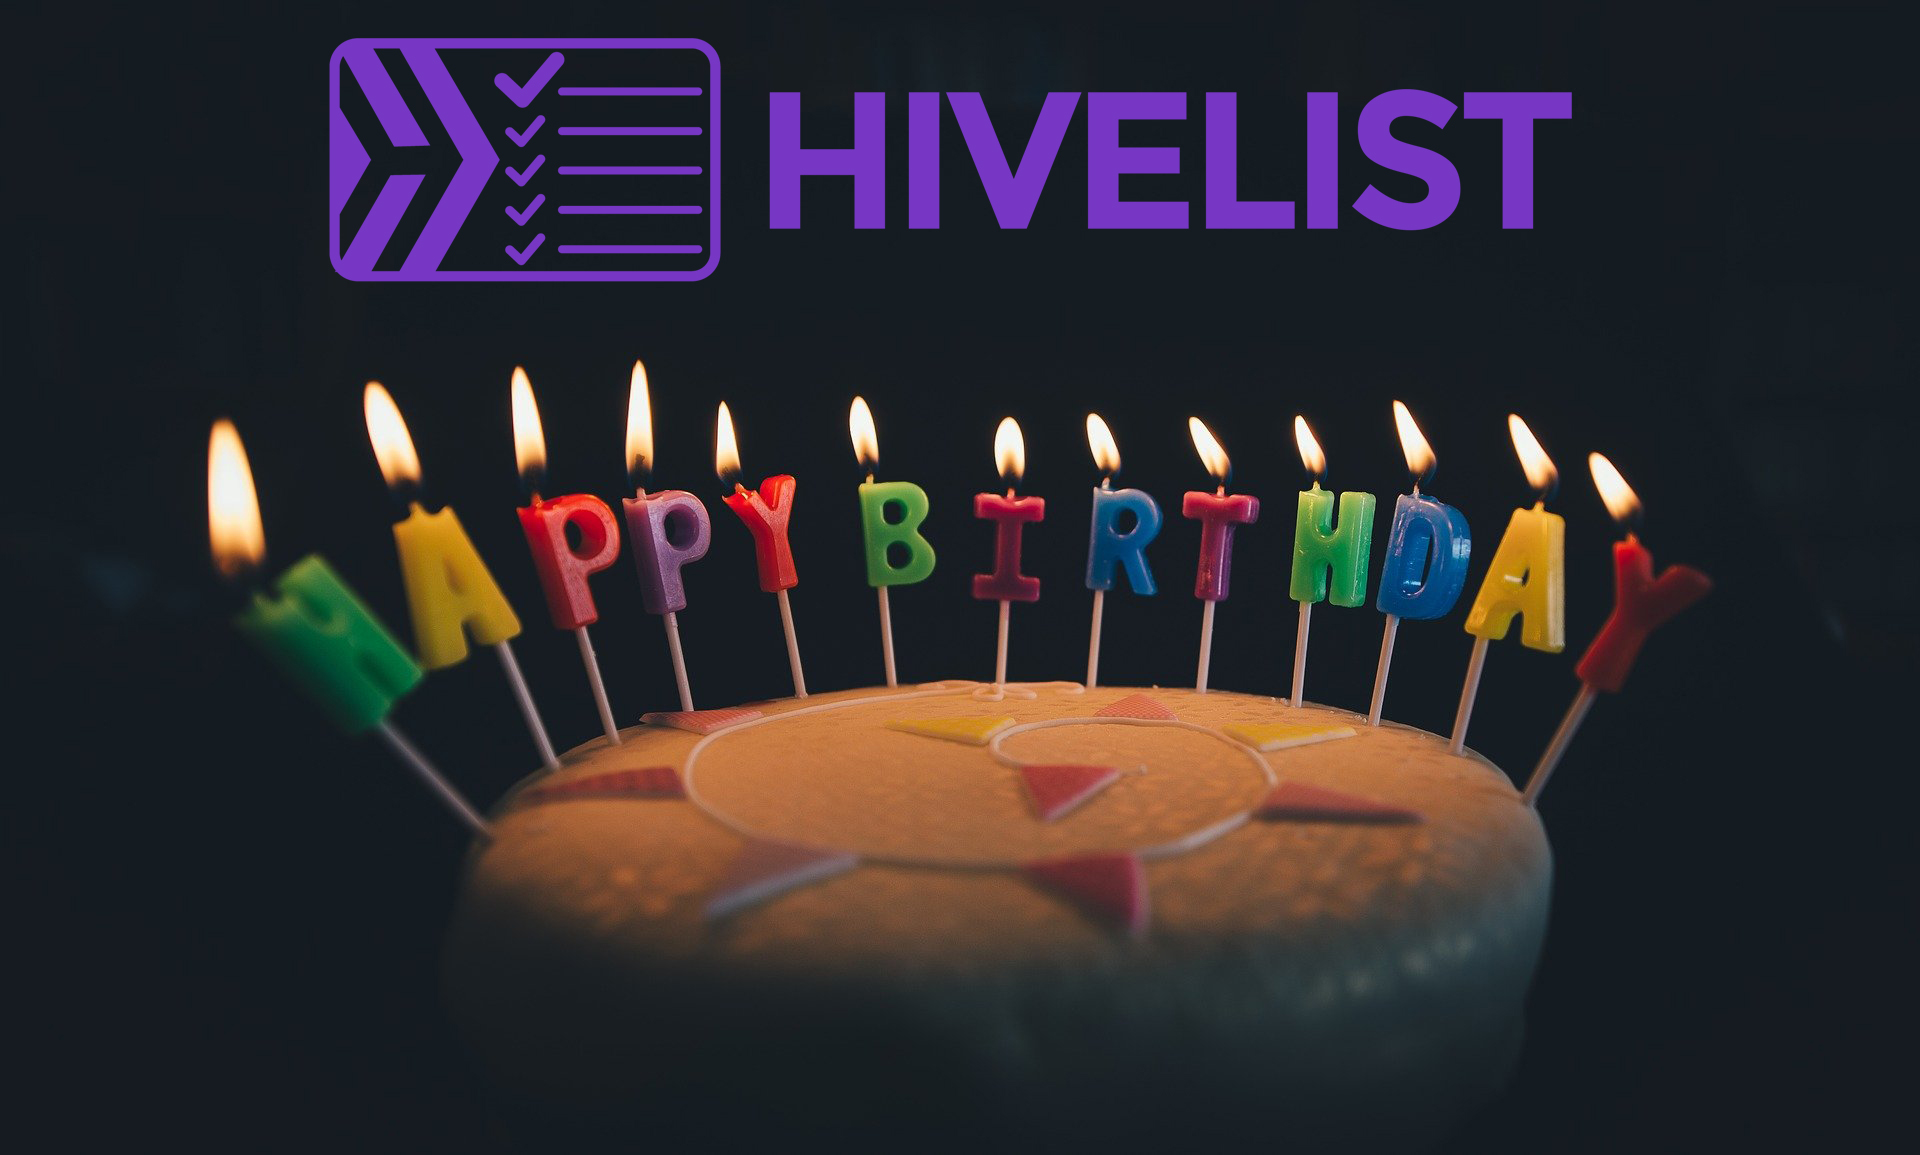 @thelogicaldude/happy-birthday-hivelist-we-are-turning-1-today